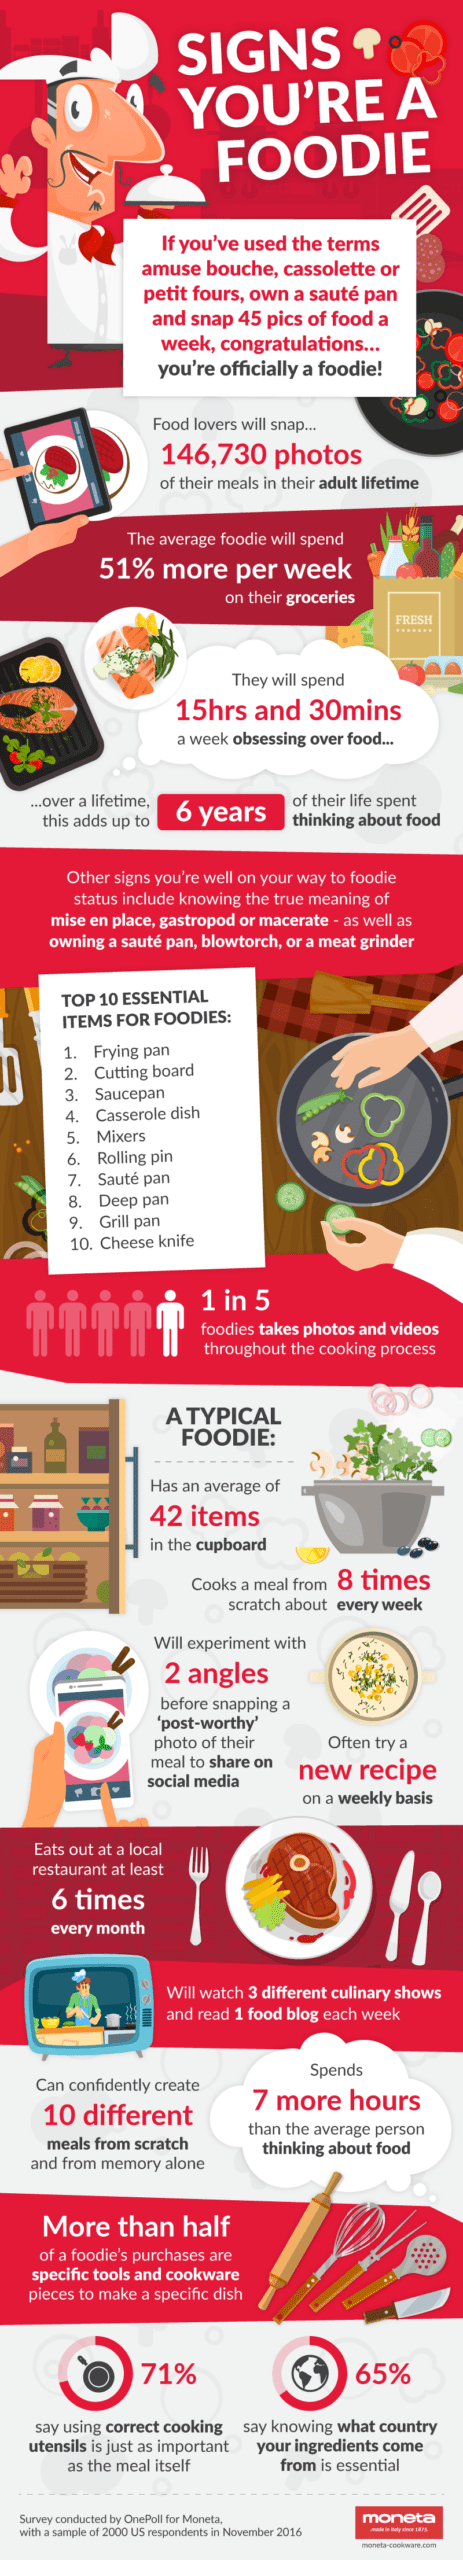 foodies_infographic_final_web